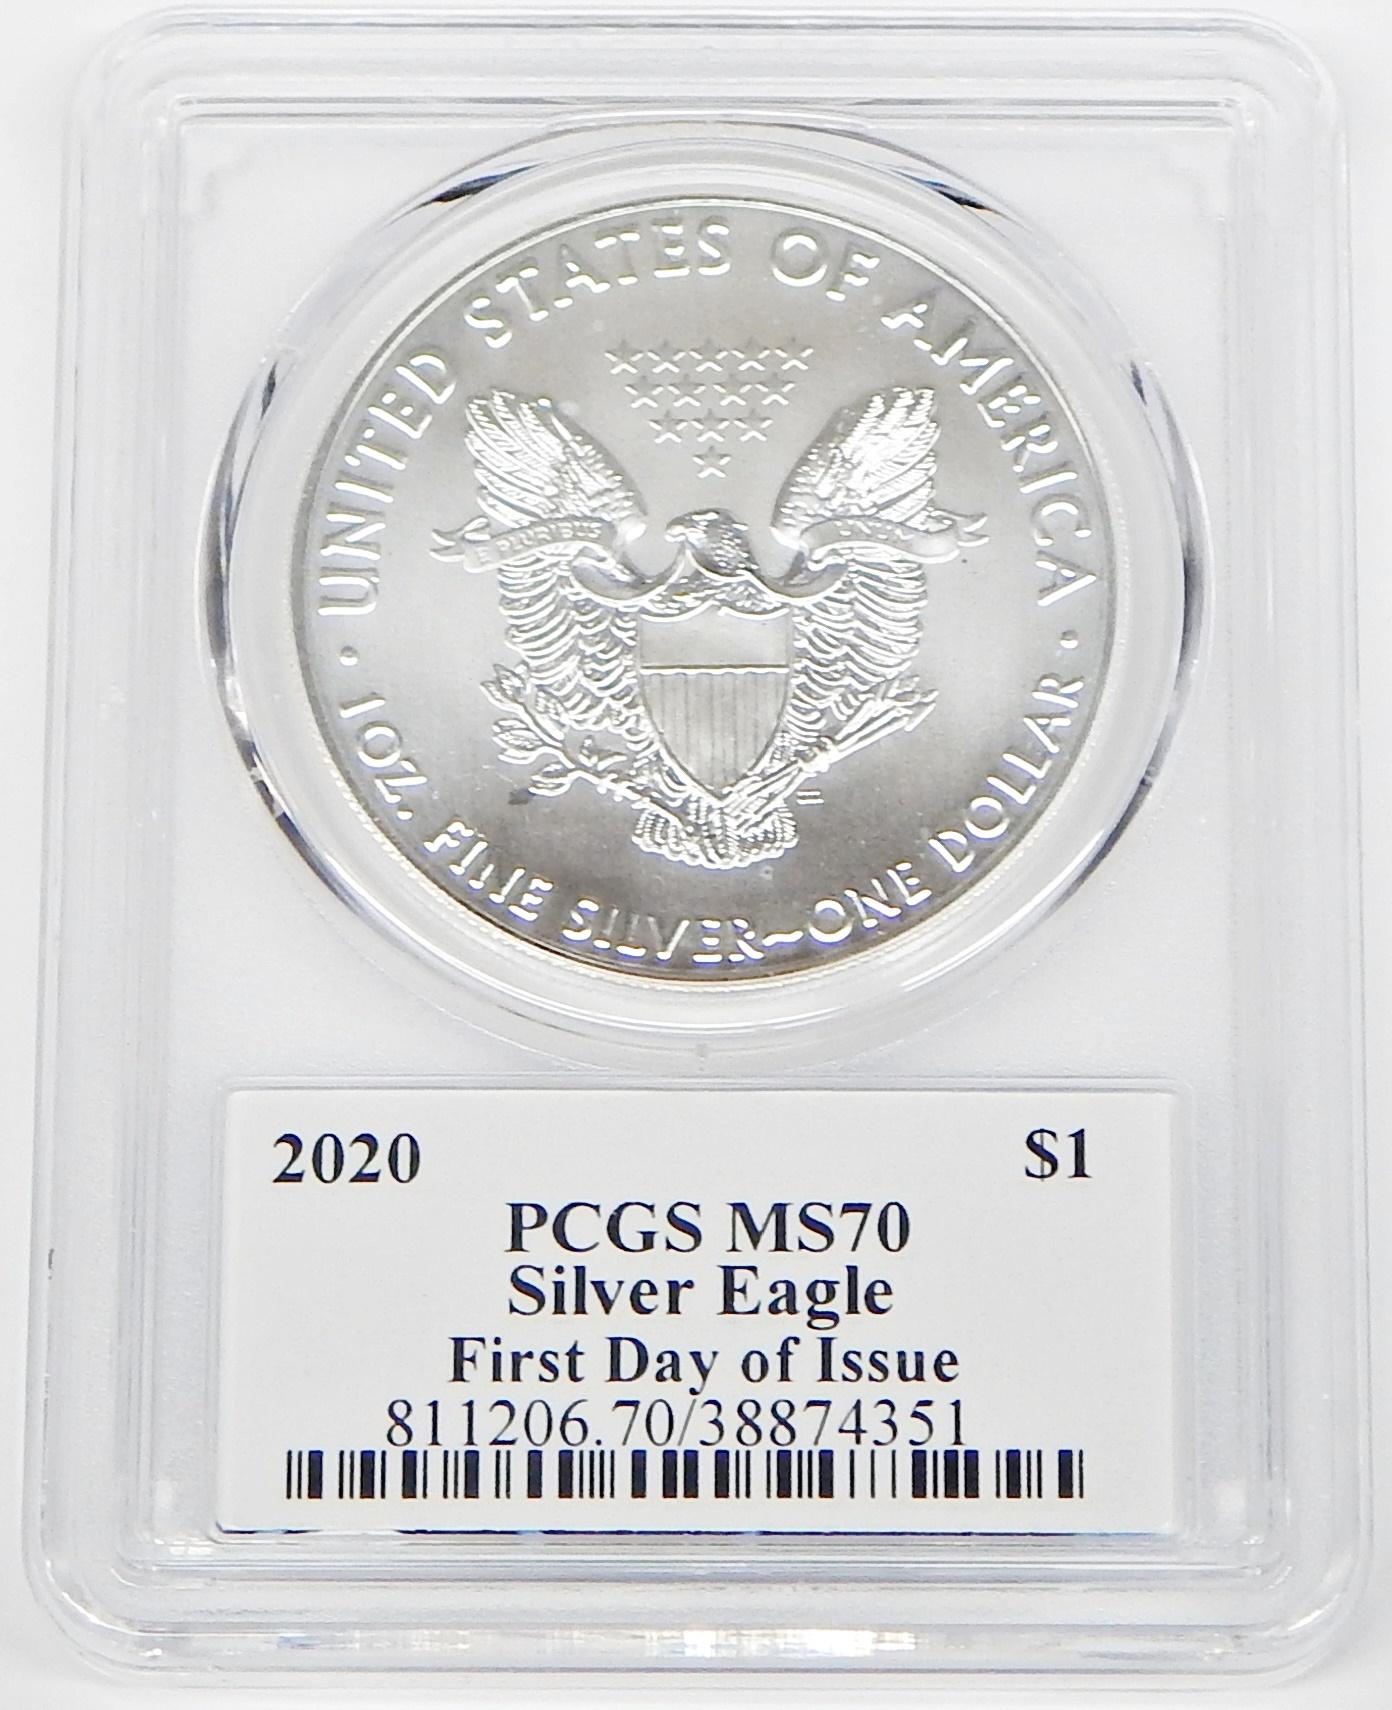 2020 SILVER EAGLE - PCGS MS70 - 1ST DAY OF ISSUE - SIGNED by THOMAS CLEVELAND